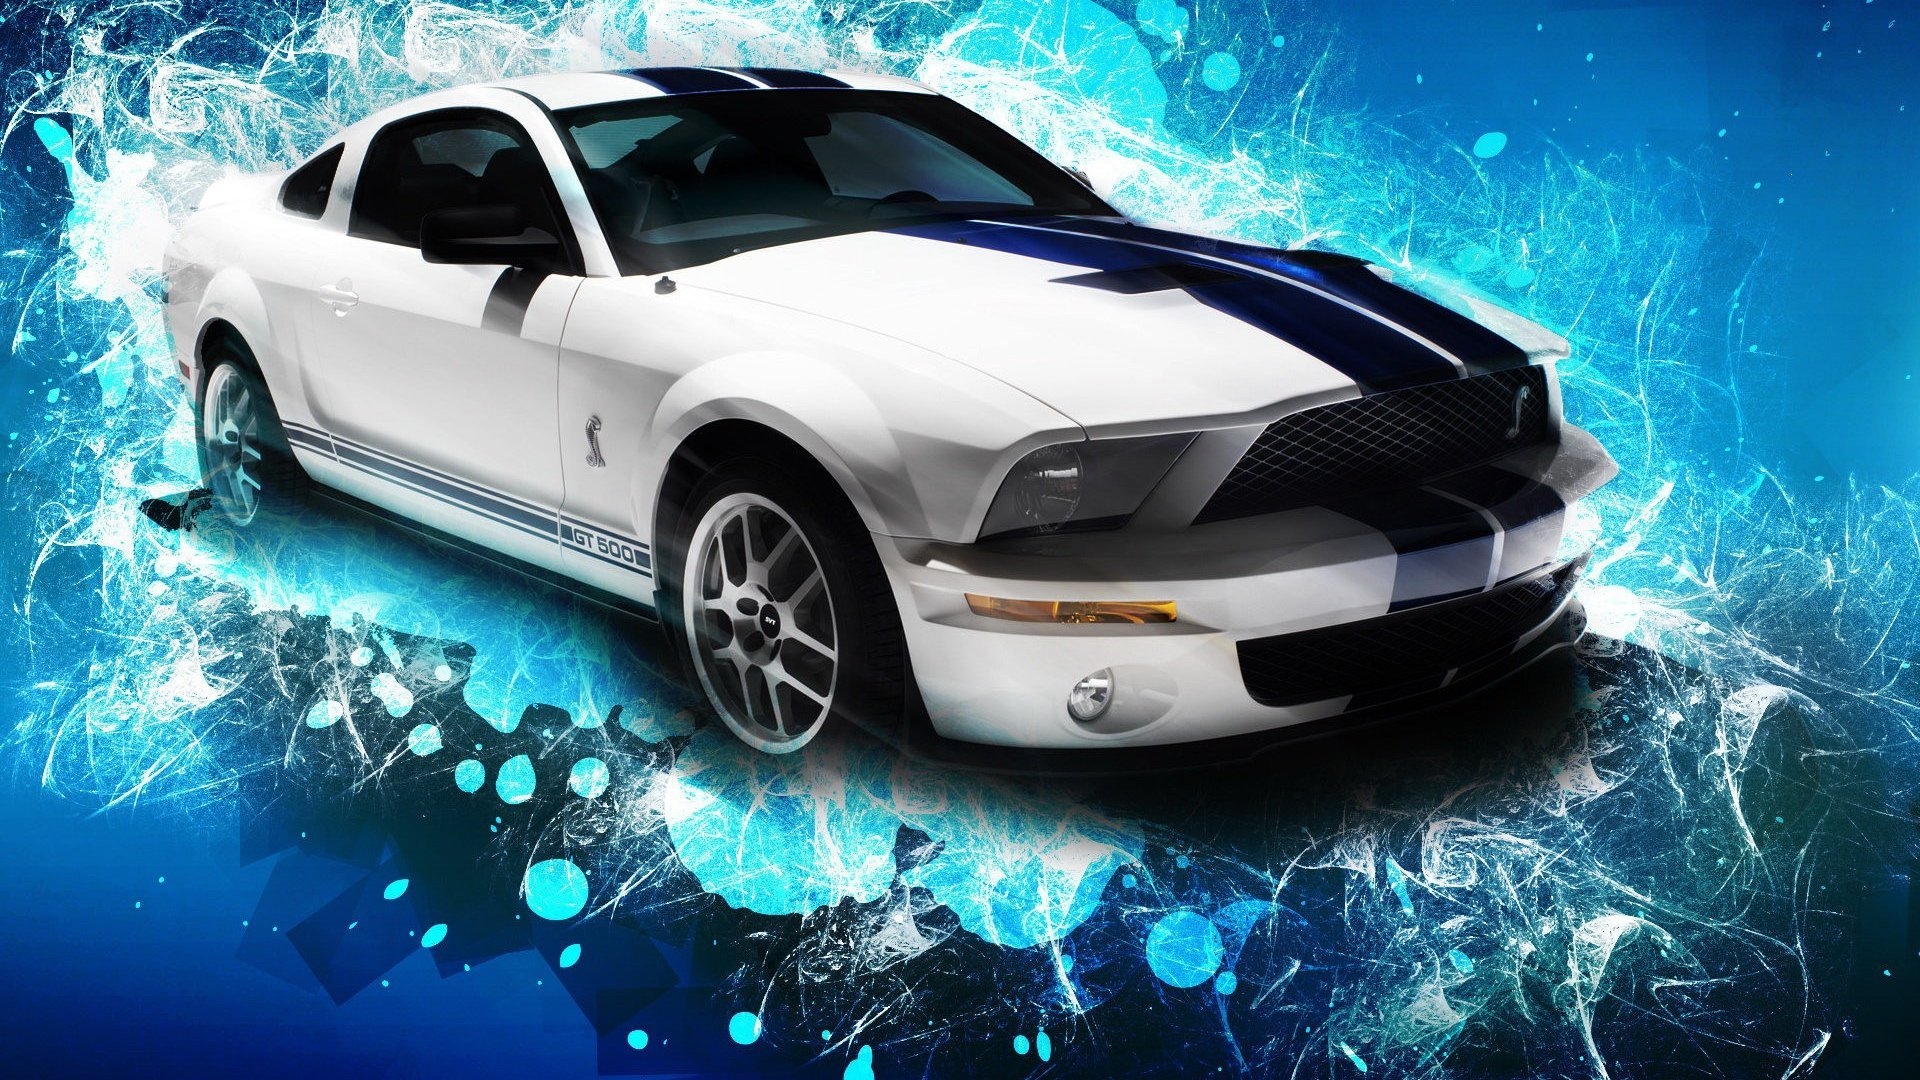 Mustang GT Front Angle for 1920 x 1080 HDTV 1080p resolution